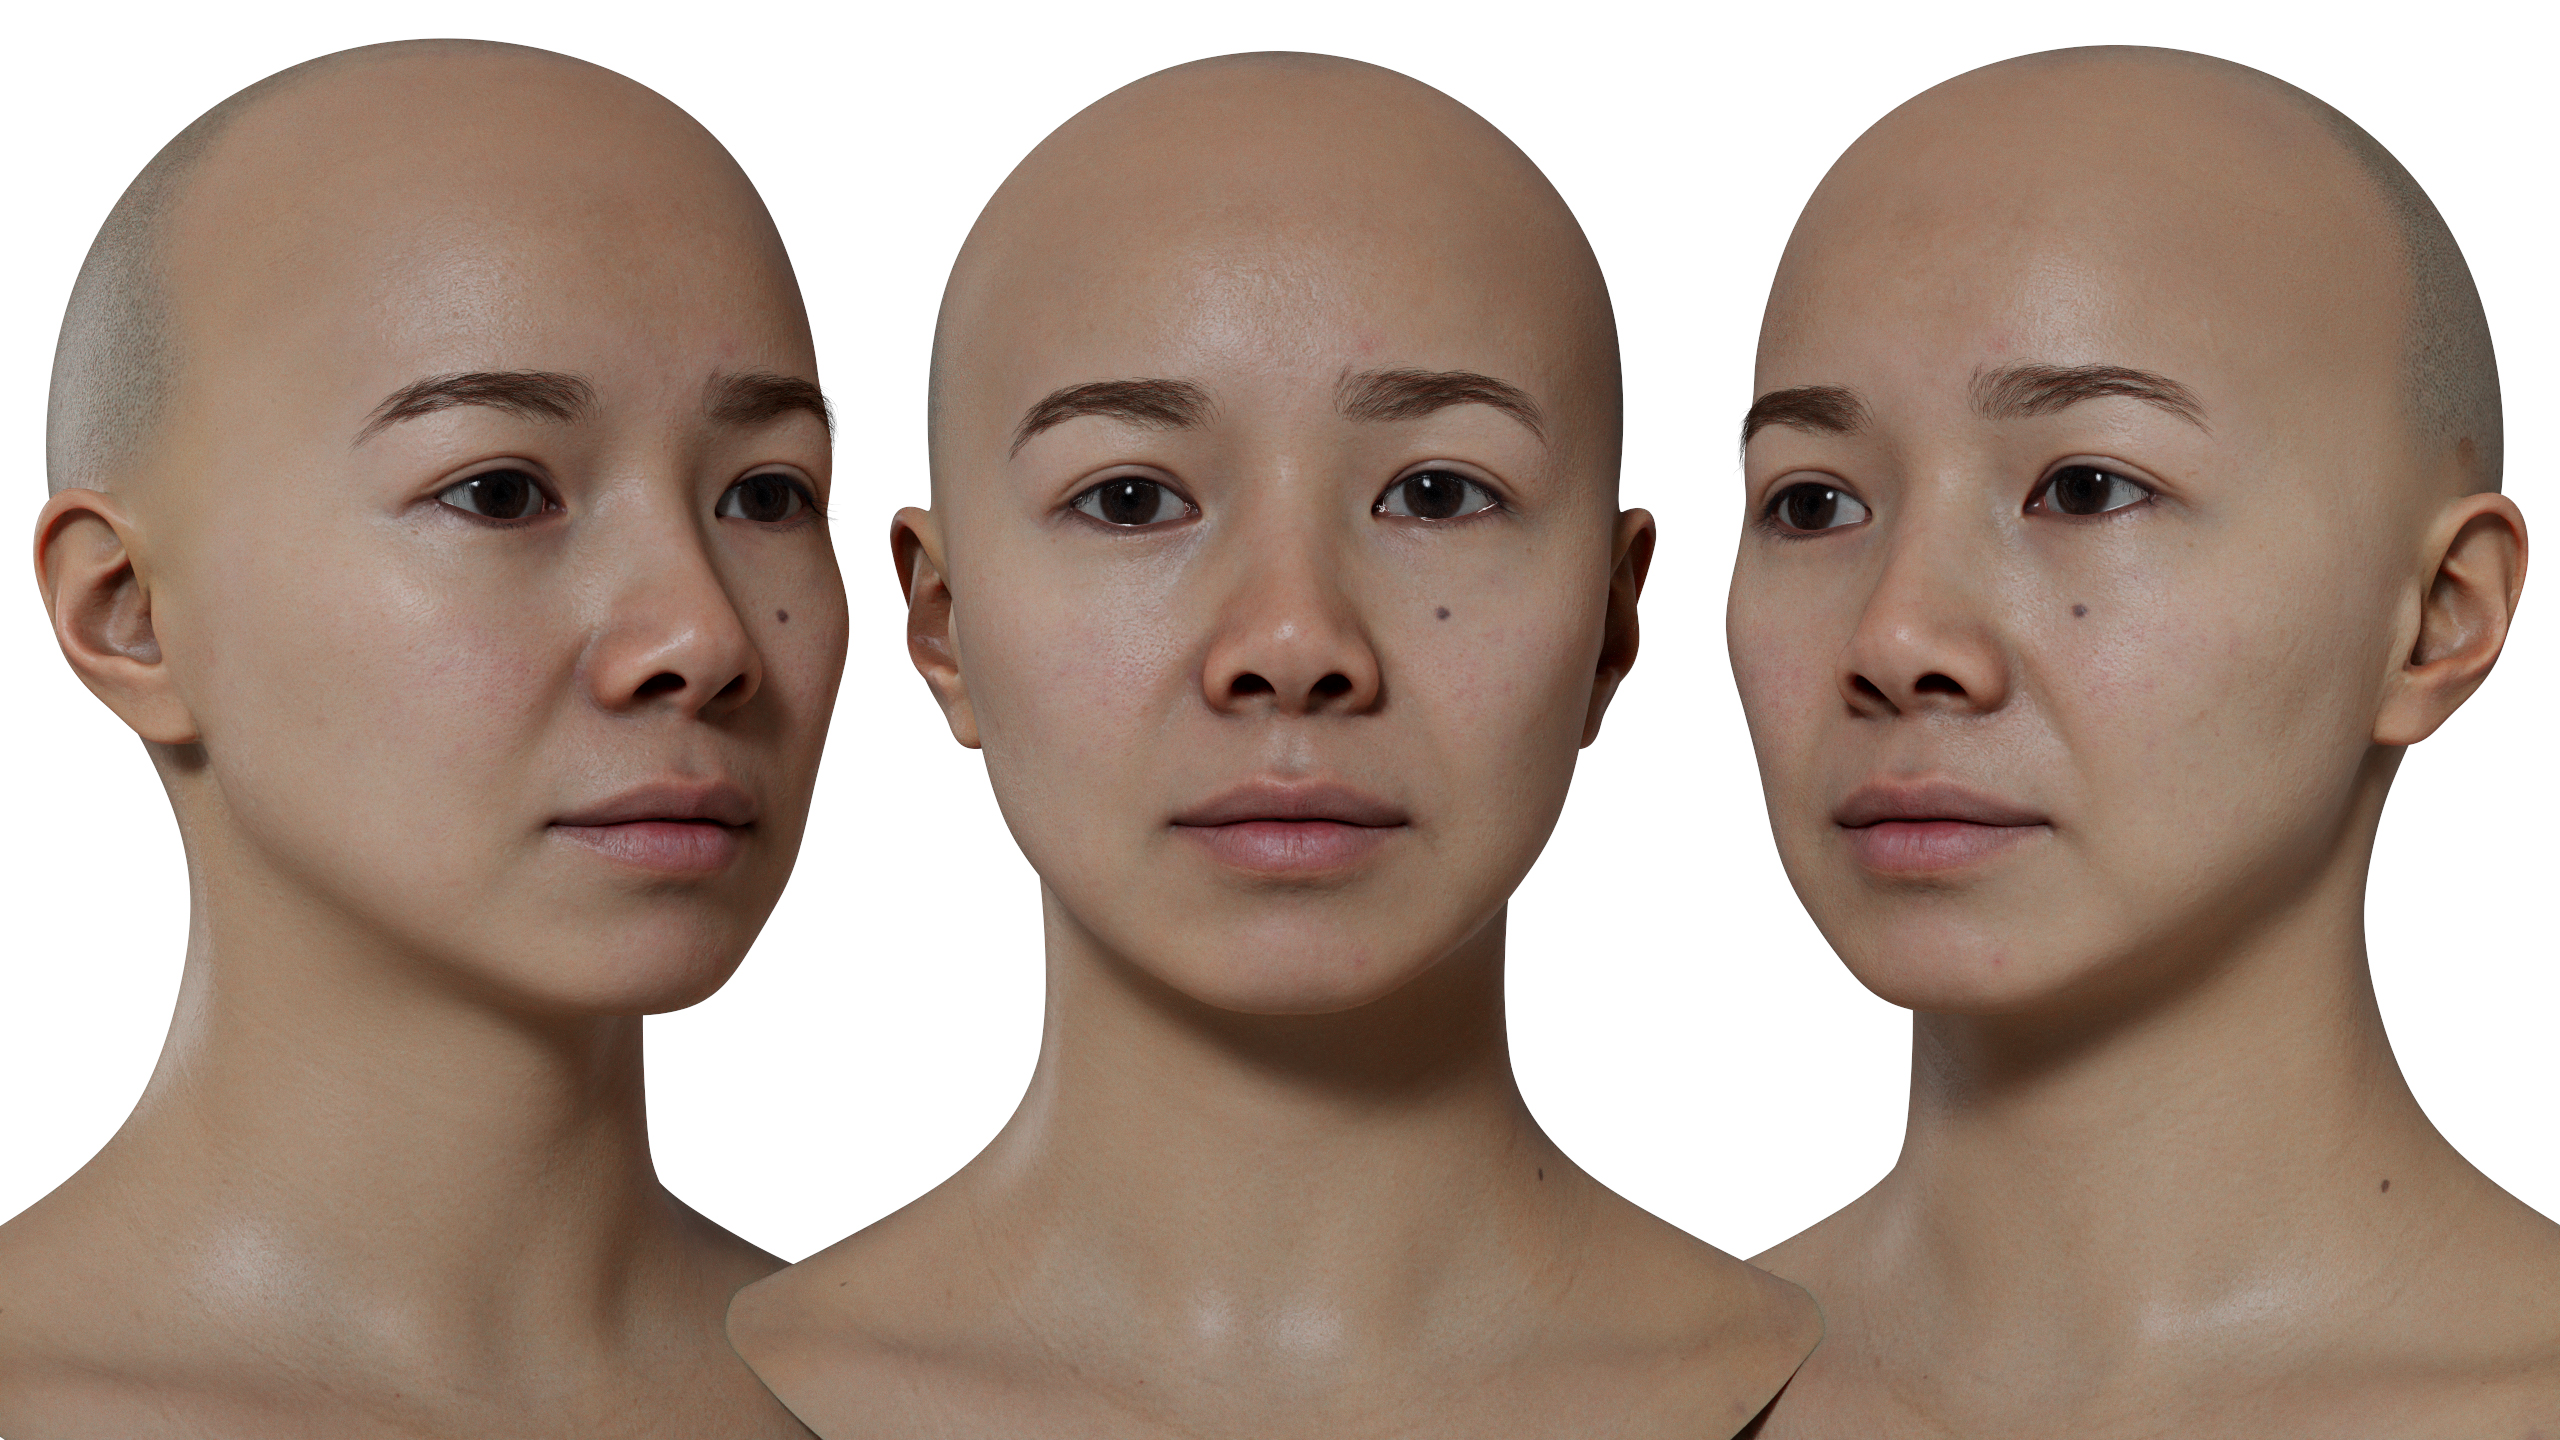 Female face scan download